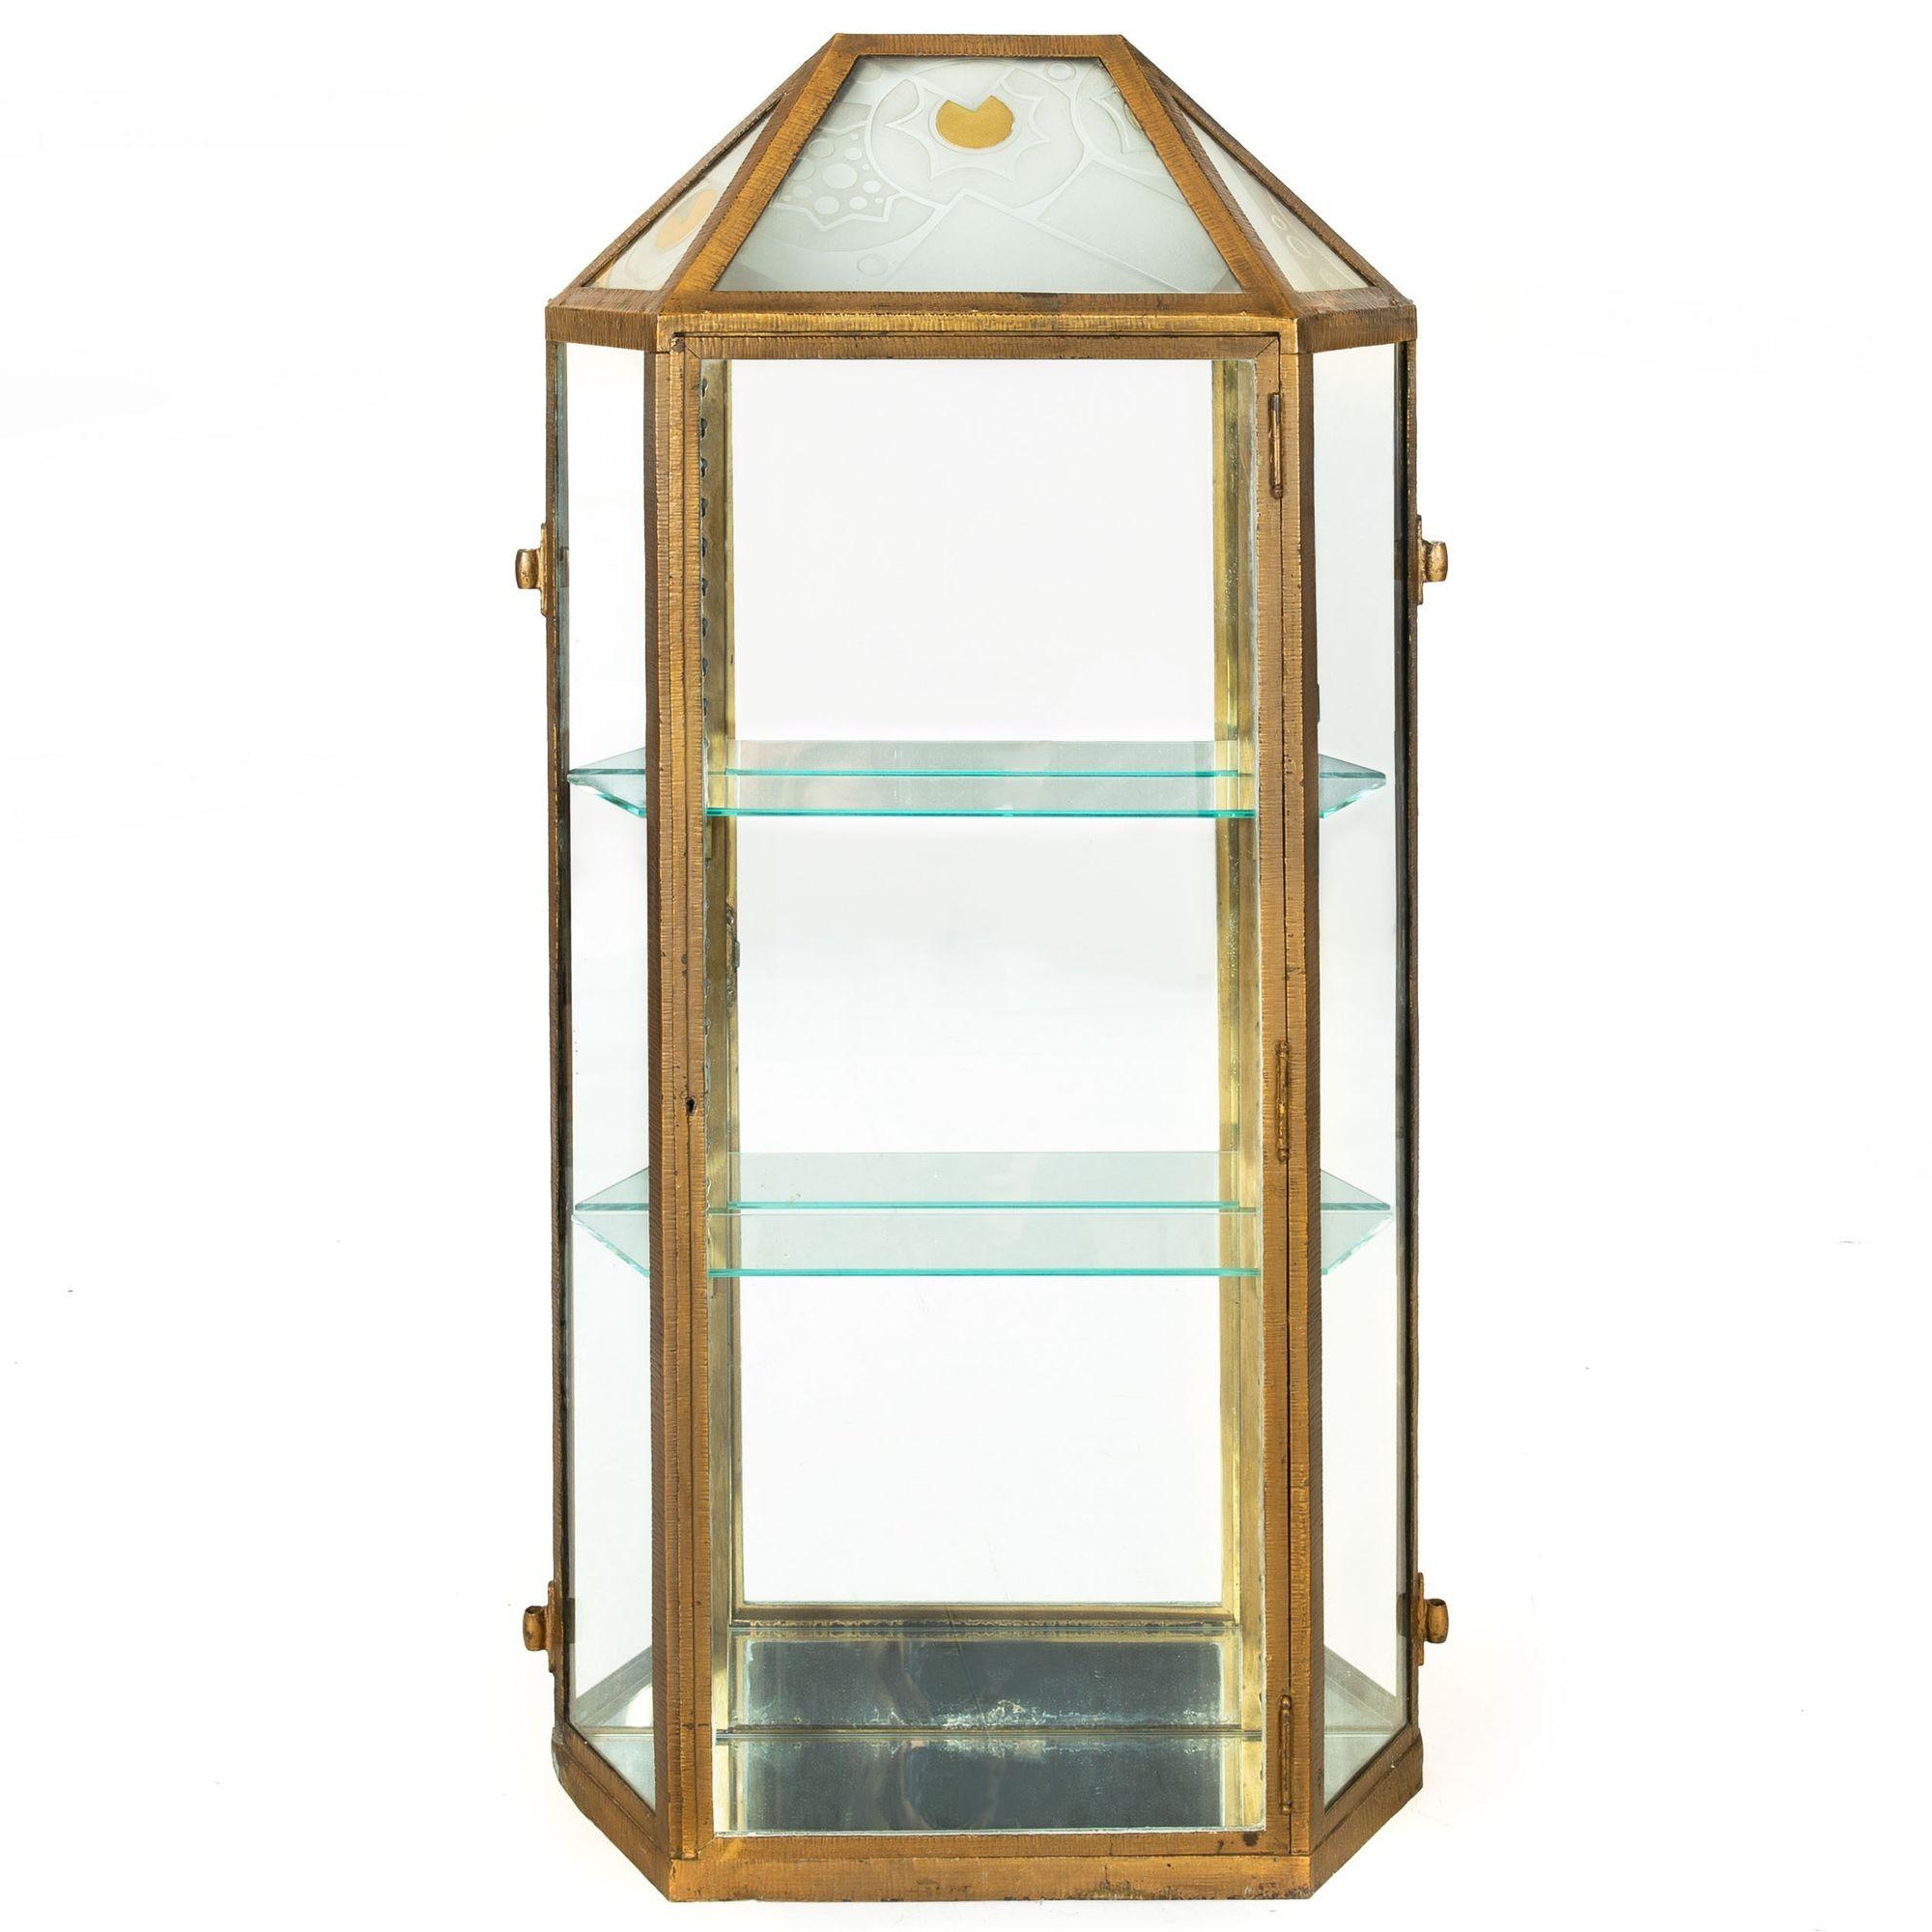 ART DECO GILDED IRON, BRASS AND ACID-ETCHED GLASS HANGING DISPLAY CABINET
France, circa 1930s
Item # 209FRI22L 

An absolutely gorgeous collector's display cabinet of the Art Deco period in France, it features acid-etched glass with gilded